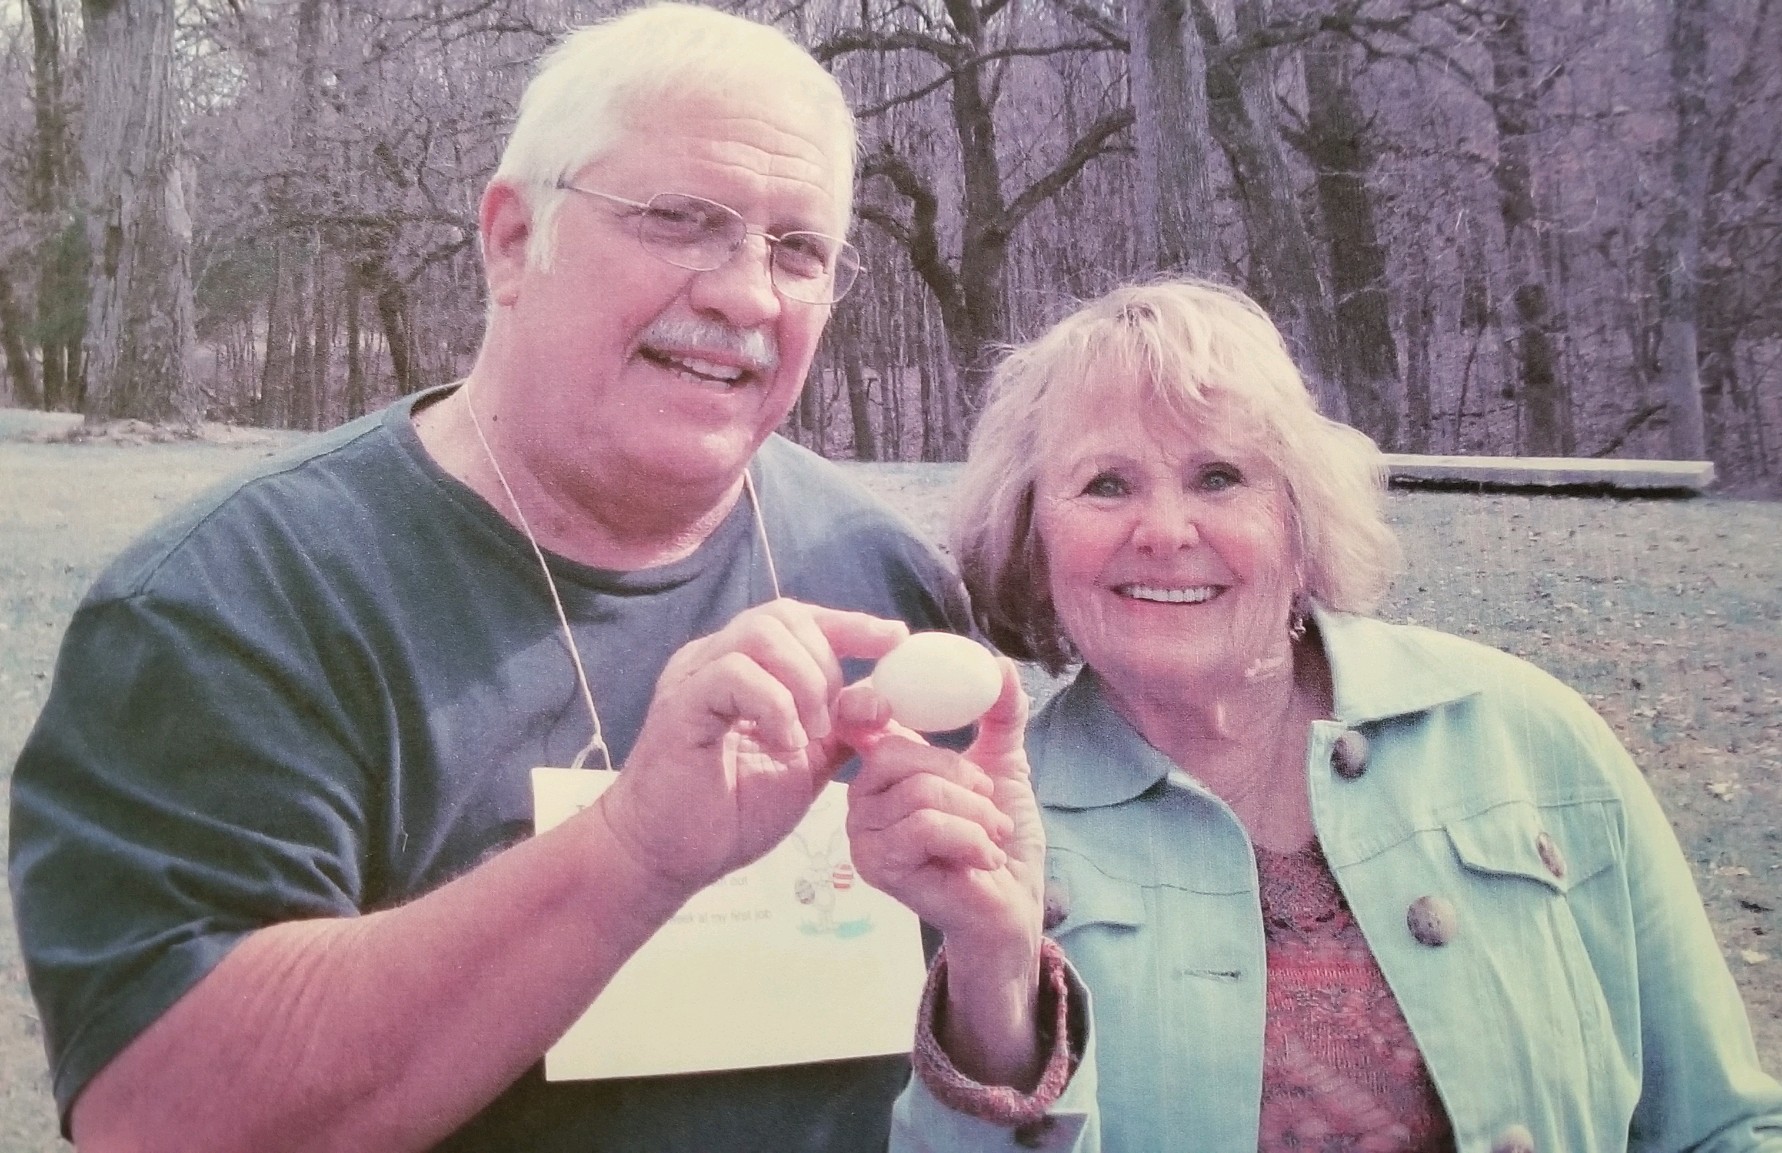 Tom and our Mom Kay won the Easter Egg toss.<br />
First time our Family met my sister Mary’s in-laws, Tom and my mom won the annual Easter egg toss. My mom ka and Tom have met again up in heaven. <br />
RIP. Our condolences Judy, Jeff and family.